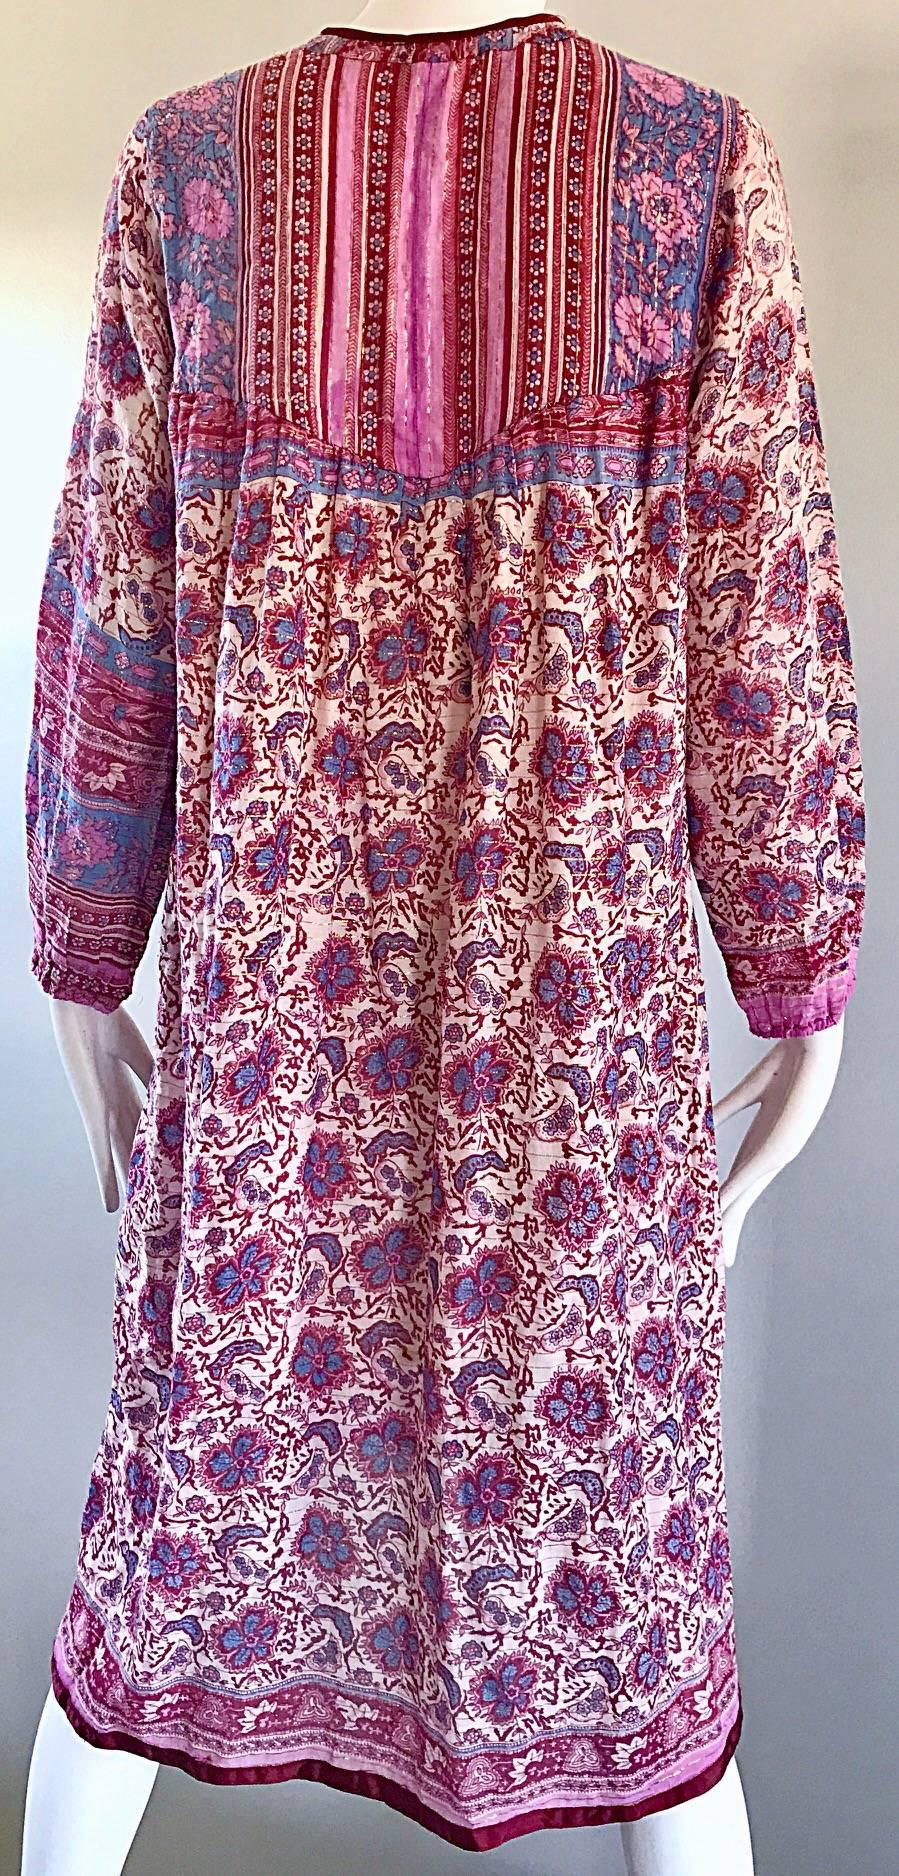 Chic 1970s boho cotton voile ethnic long sleeve sac dress! Features soft colors of pink and purple paisley and flowers throughout. Gold metallic silk thread throughout. Burgundy silk panel above the bust, with addition maroon panels above. Beaded